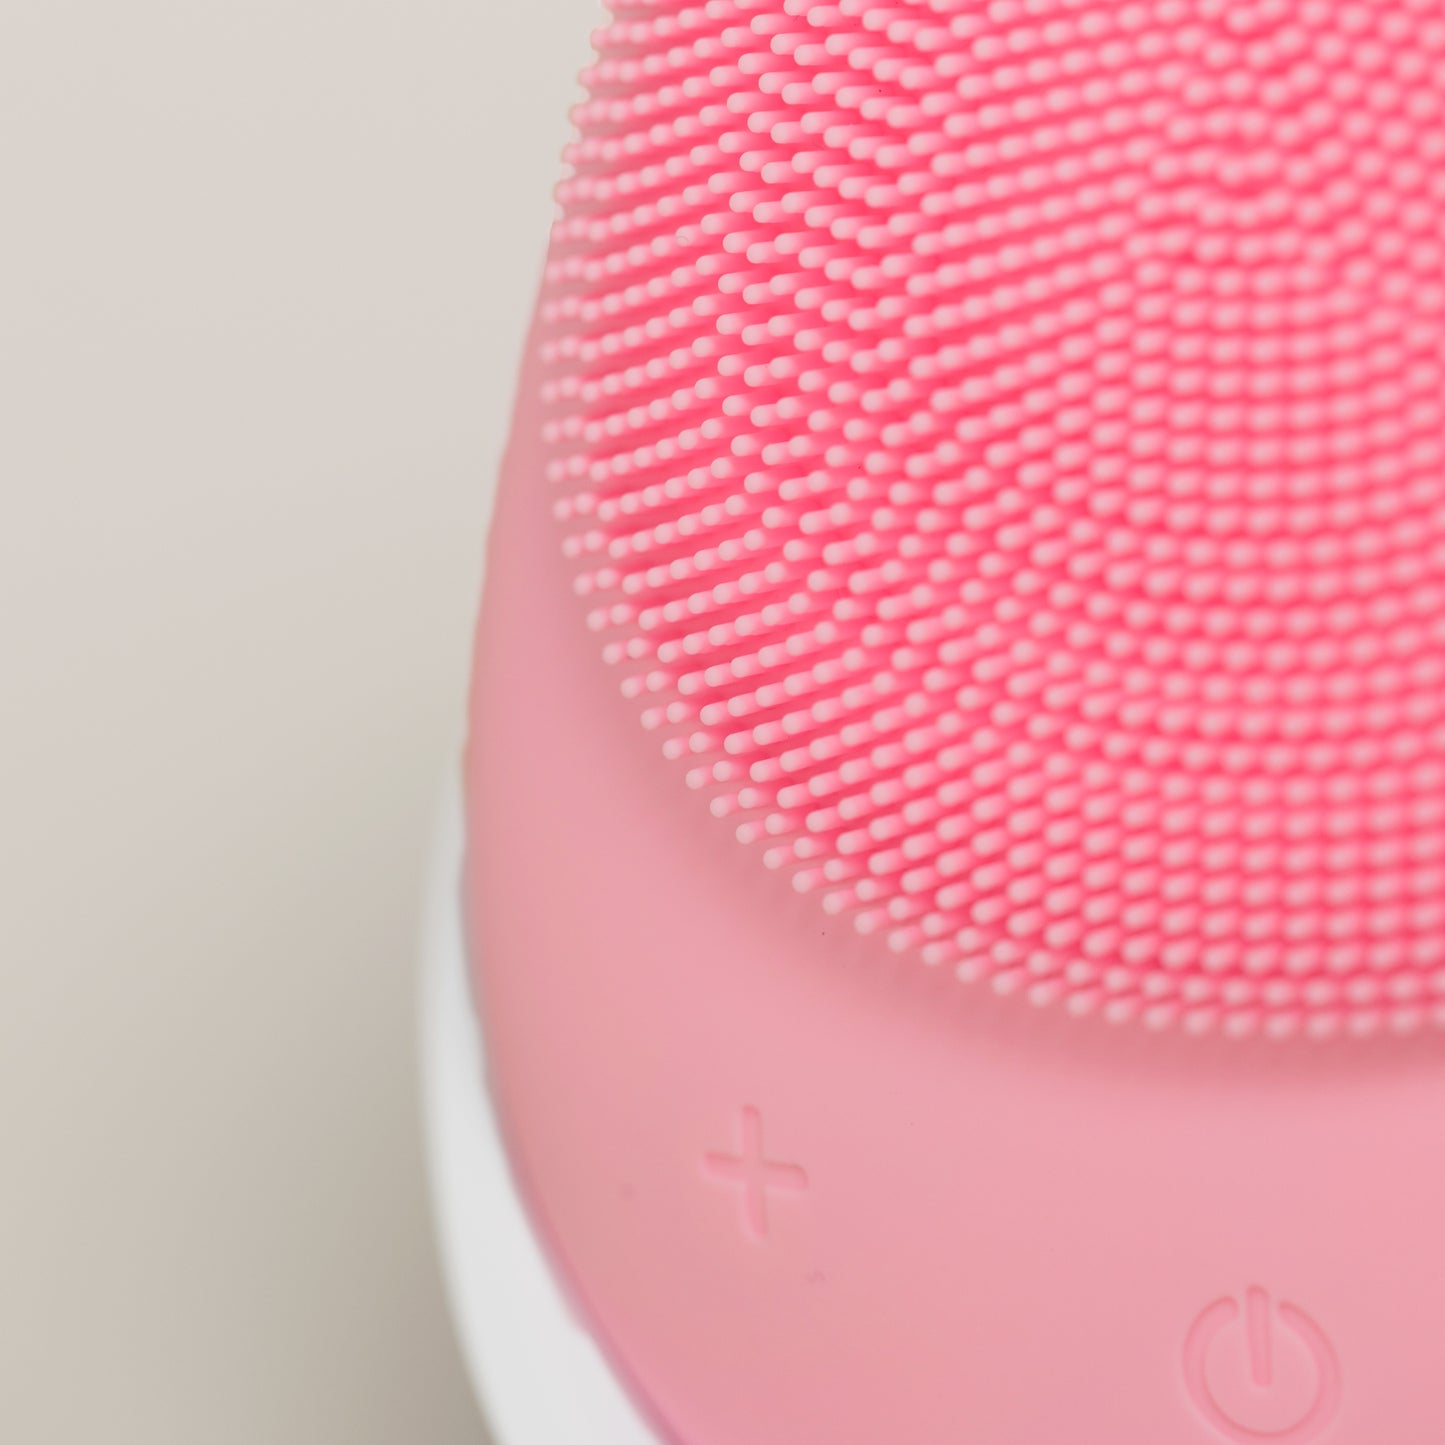 Cleansing Egg - Silicone Facial Cleansing Brush